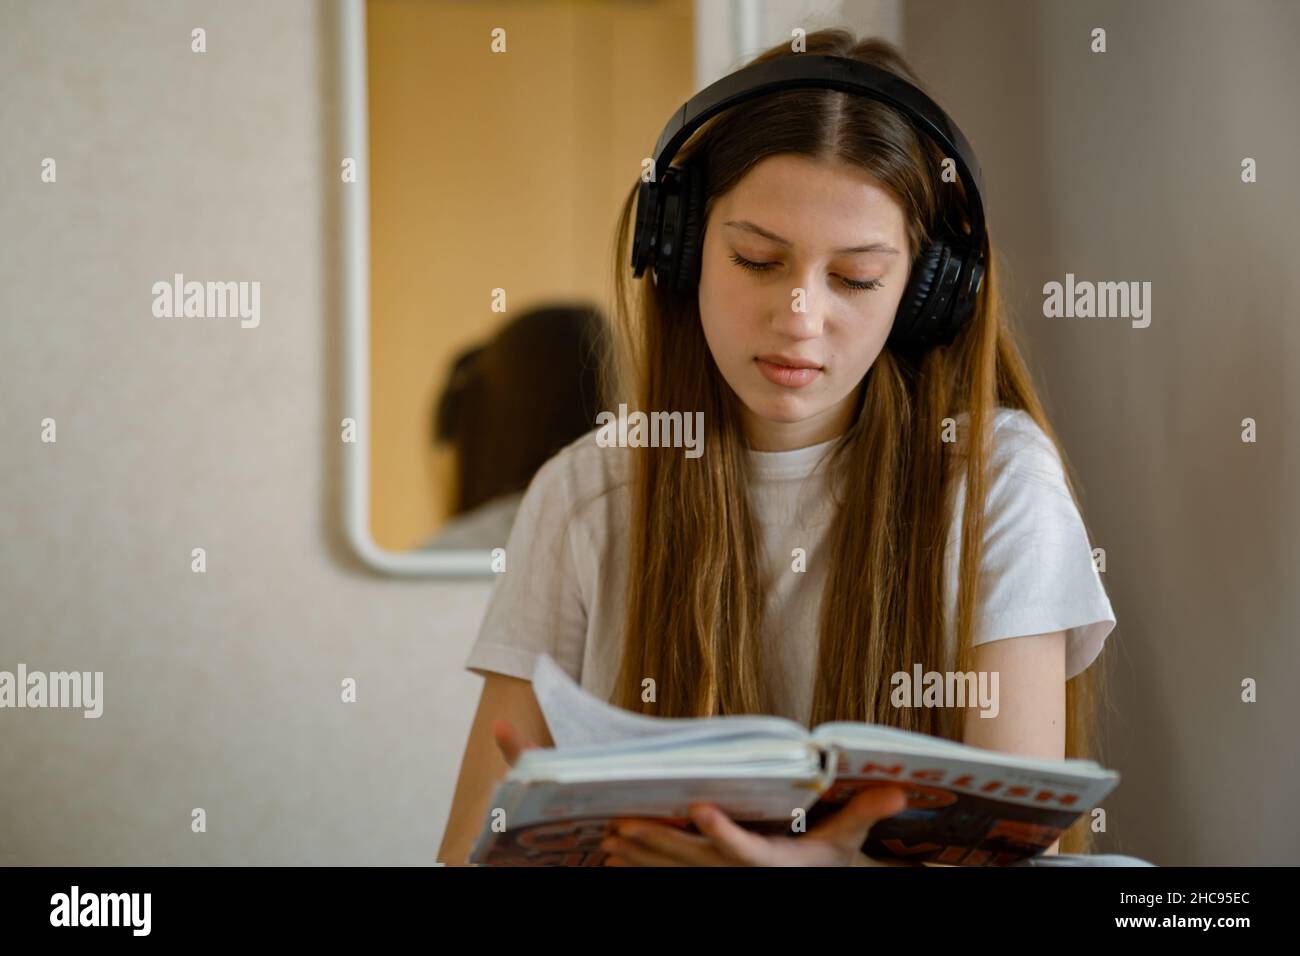 Young teenage girl in headphones with a textbook in her hands. Stock Photo